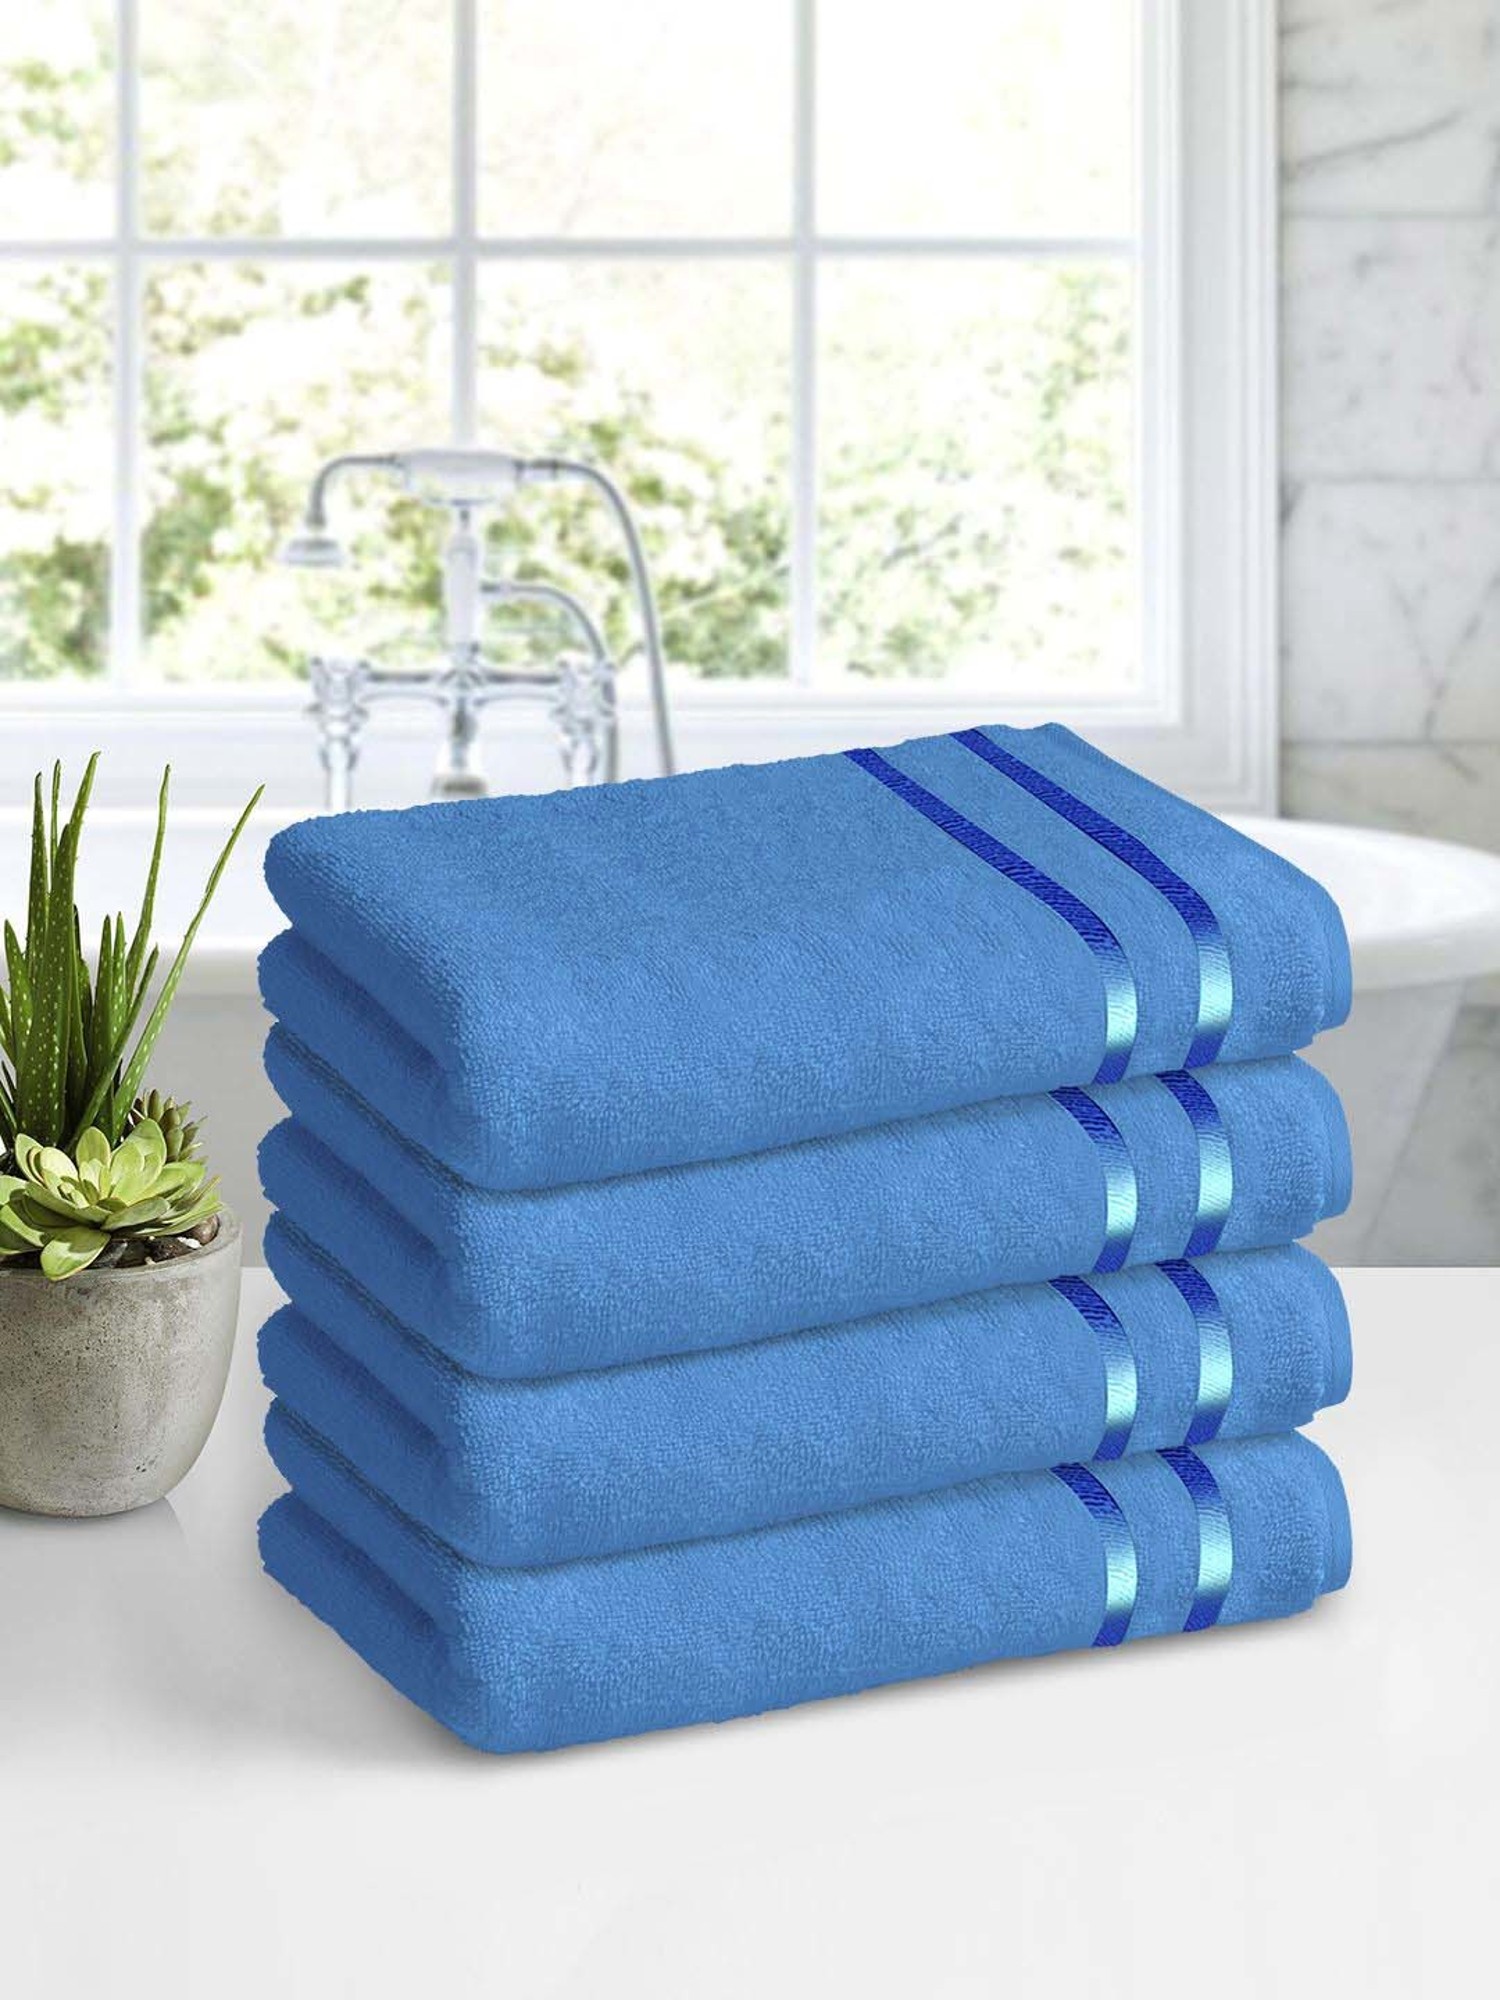 Buy Story@Home Blue Cotton 450 GSM Small Bath Towel - Set of 4 at